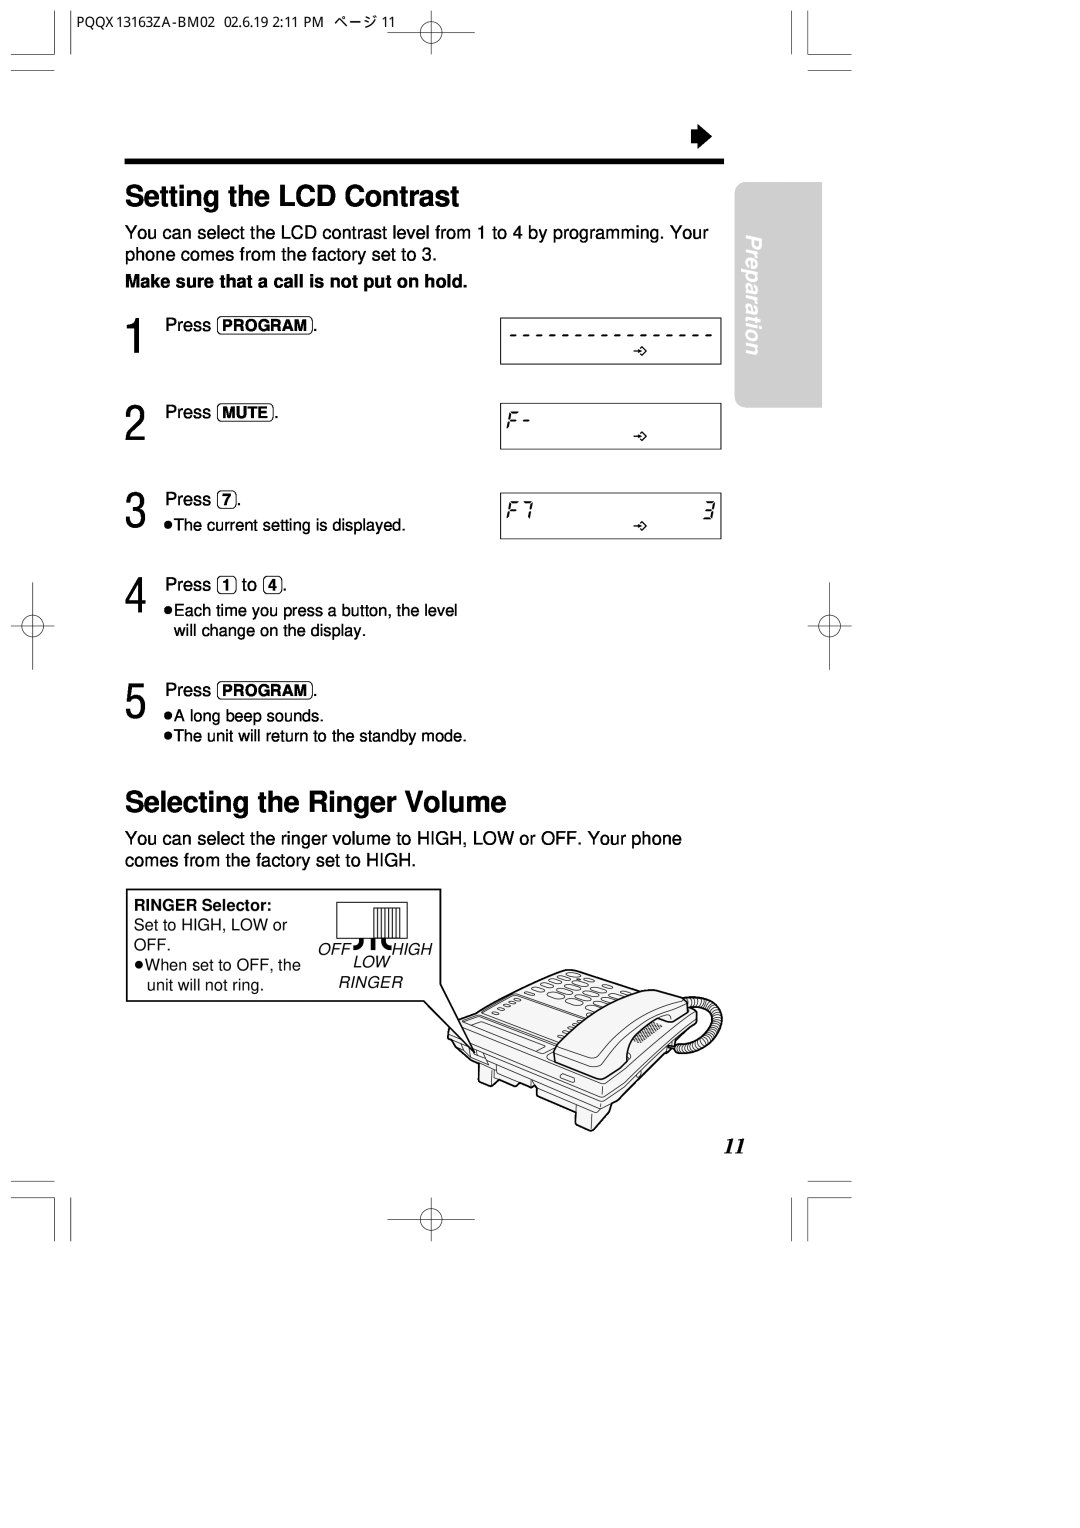 Panasonic KX-T2375SUW operating instructions Setting the LCD Contrast, Selecting the Ringer Volume, Preparation 